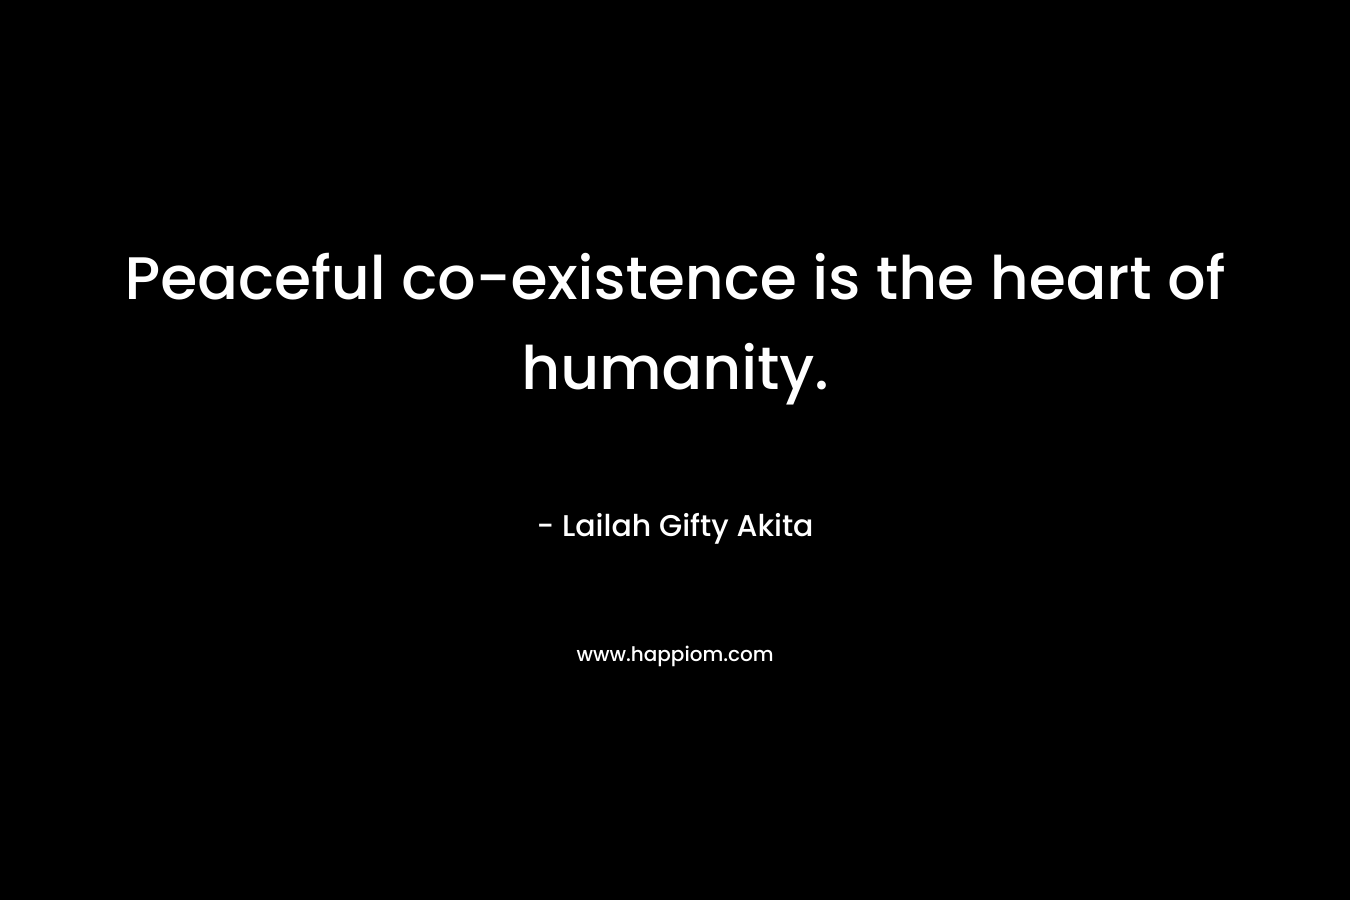 Peaceful co-existence is the heart of humanity. – Lailah Gifty Akita